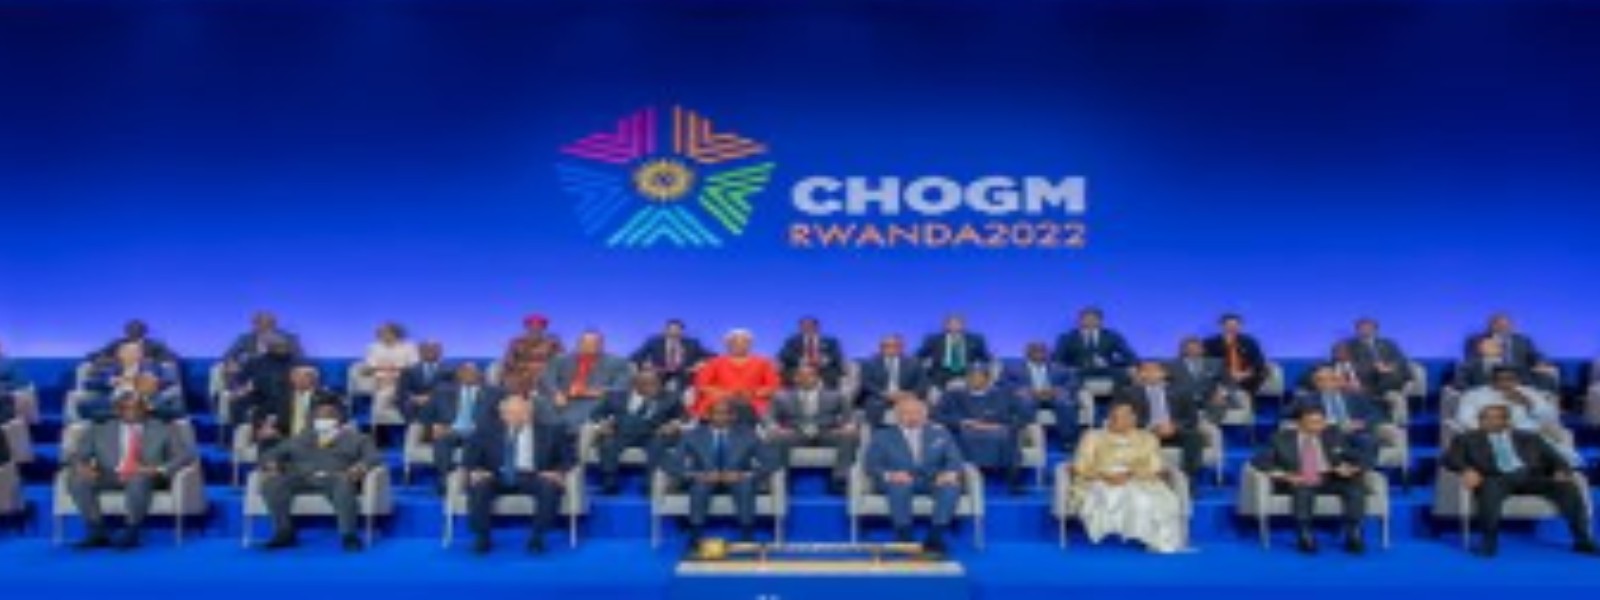 Foreign Ministry updates GLs visit to CHOGM 2022